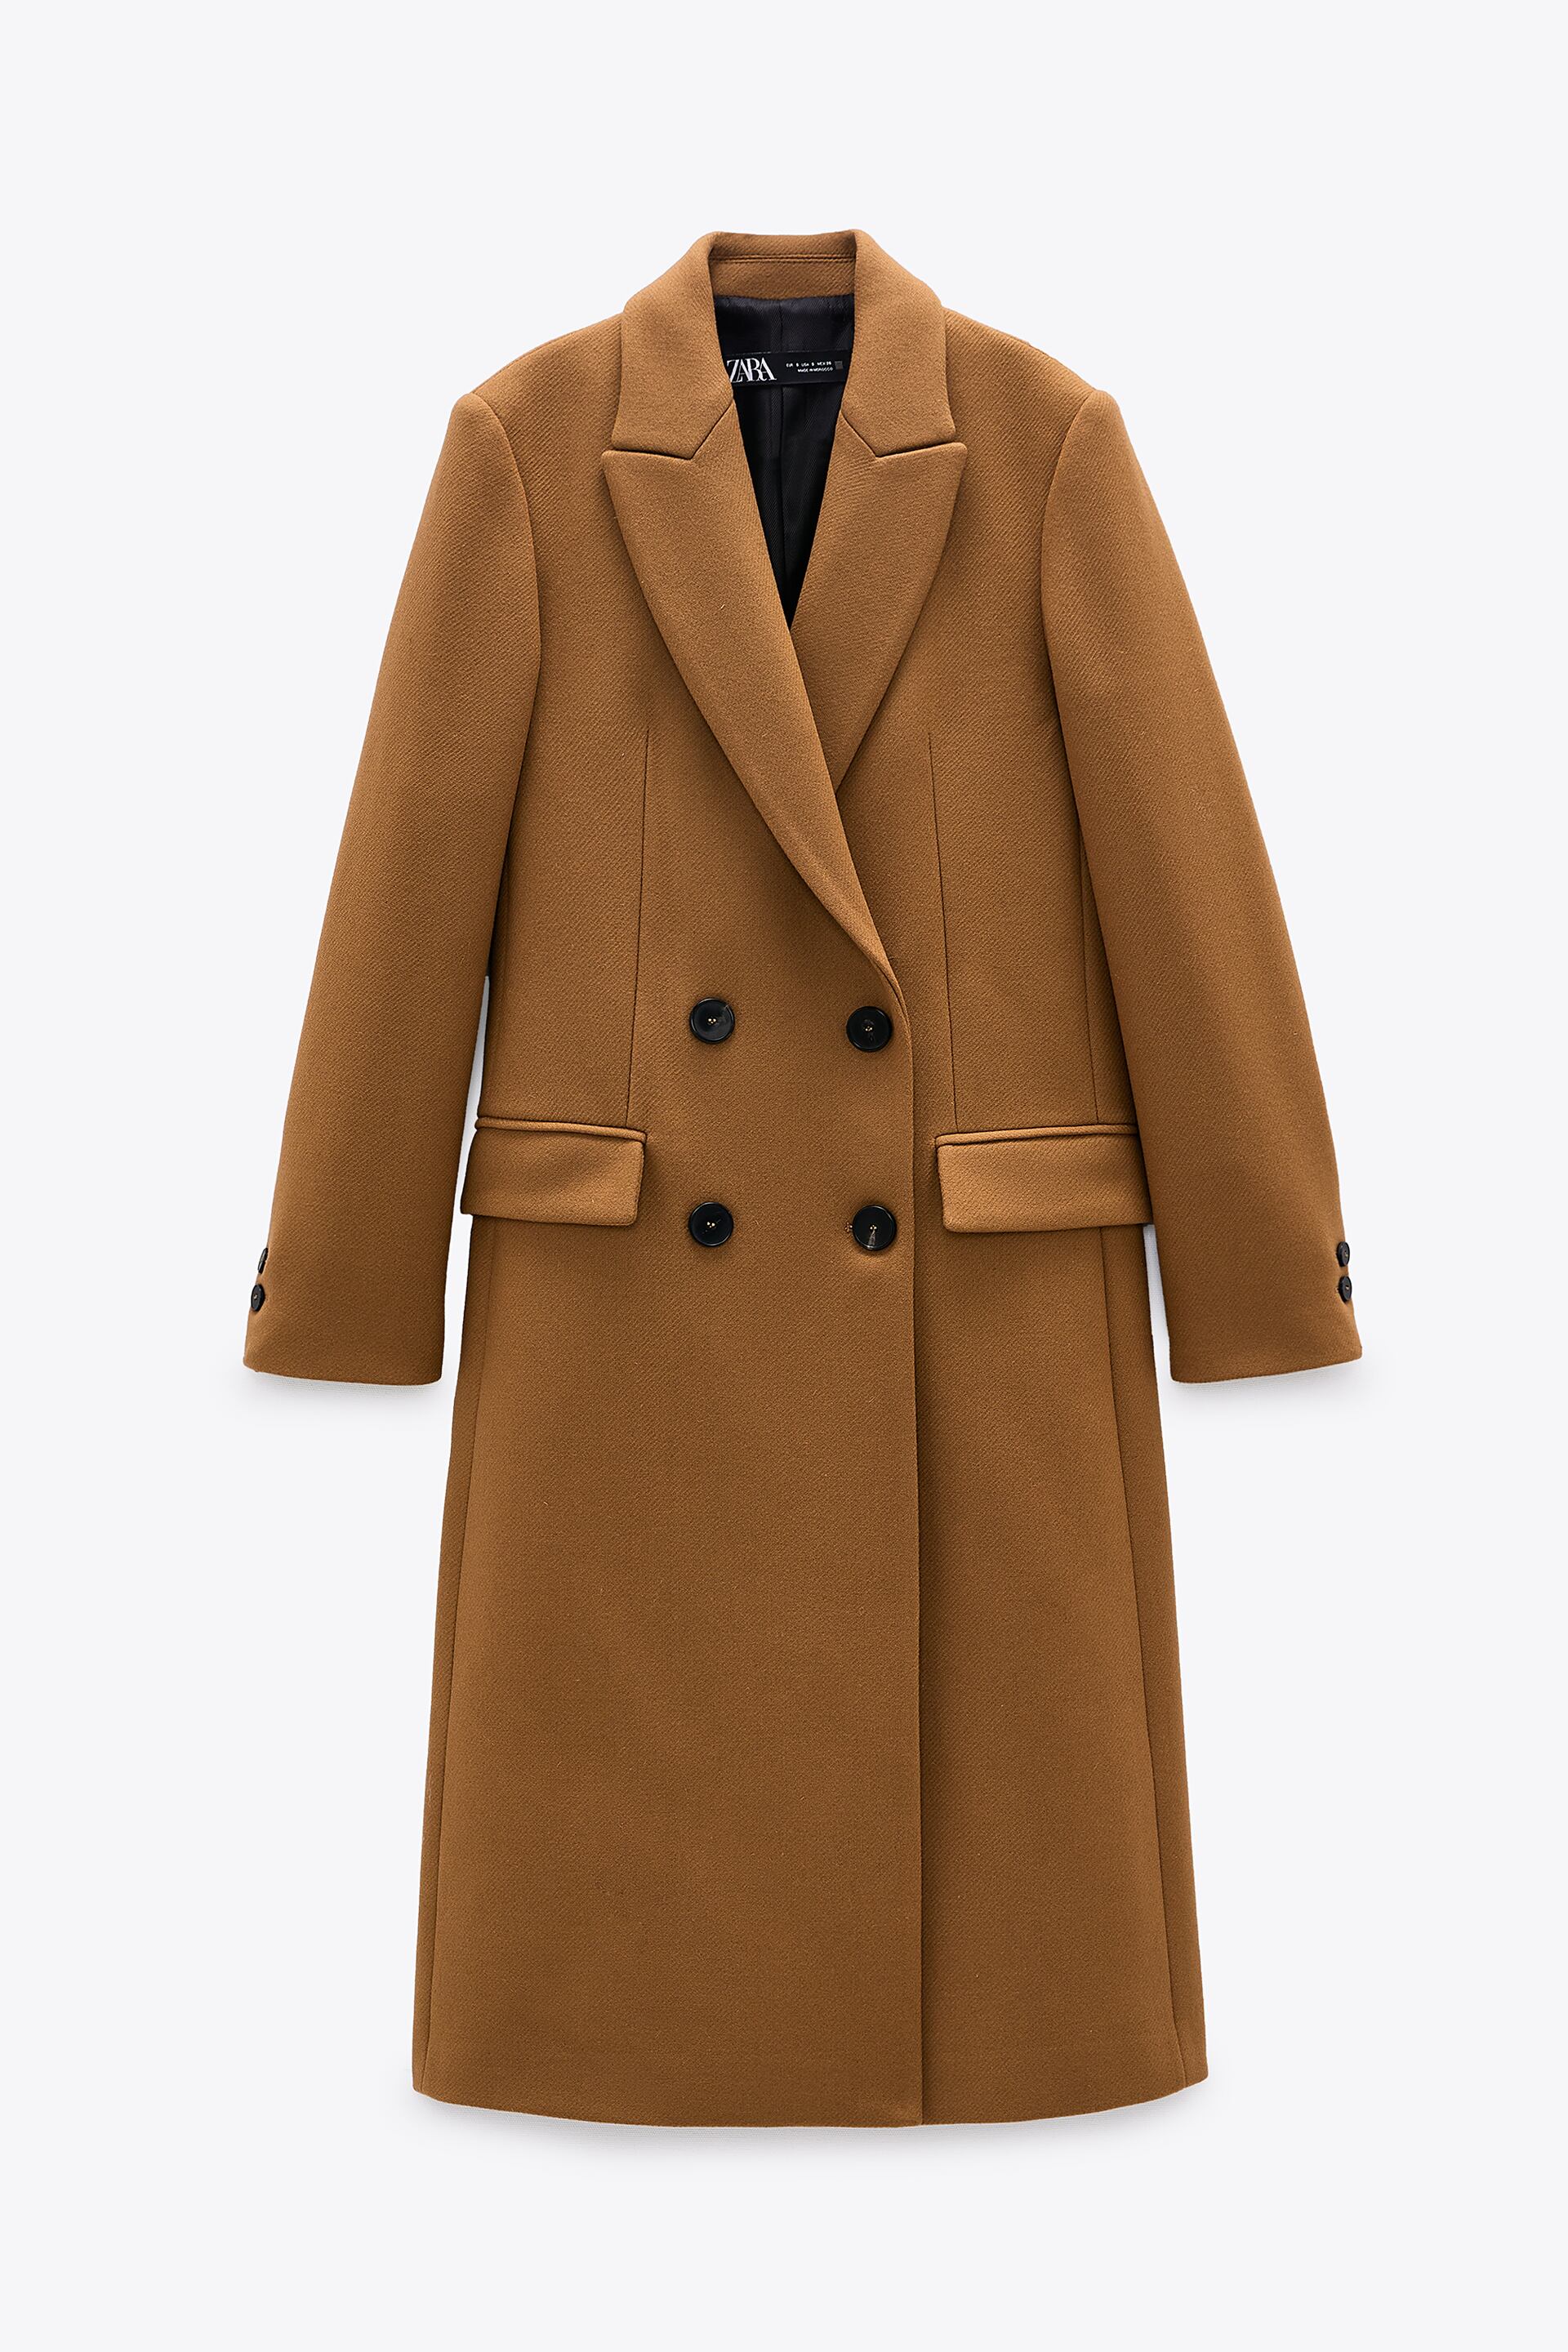 ZARA CAMEL /TOFFEE BROWN DOUBLE BREASTED LONG WOOL BLEND COAT 8341/694 8341/116